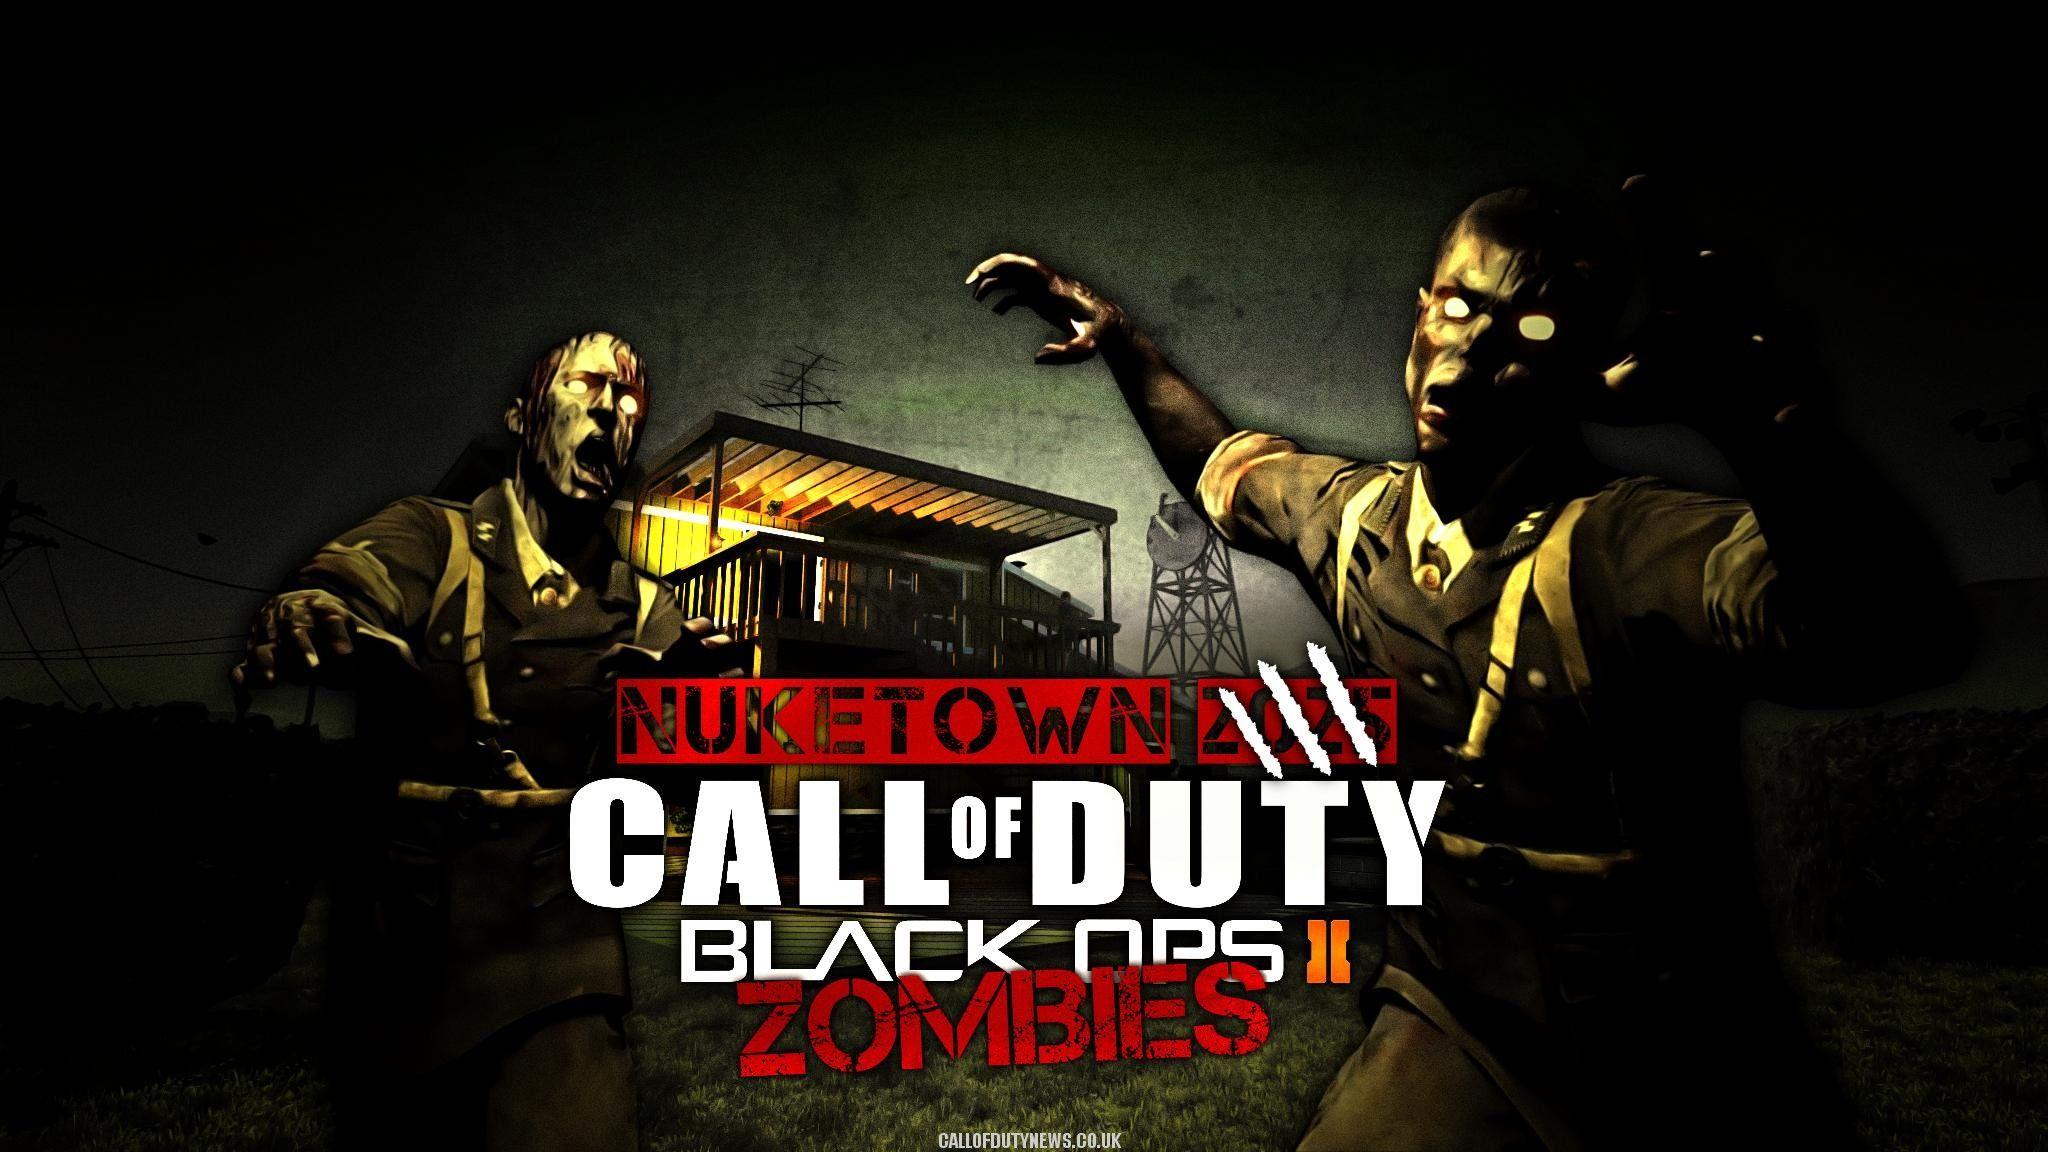 call of duty black ops 2 zombies pc download free